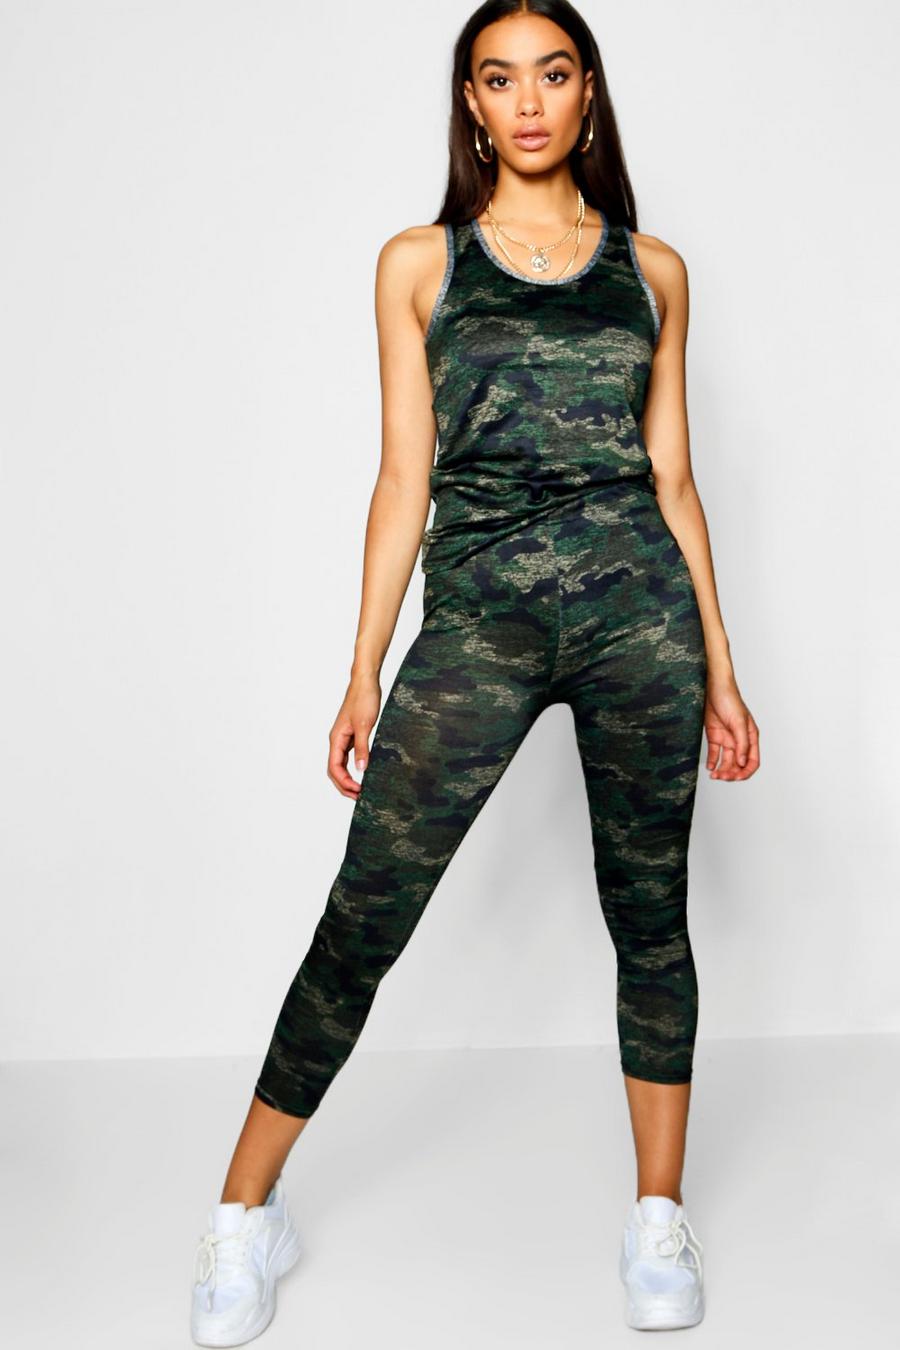 Green Camo Print Sports Tank Top And Leggings image number 1